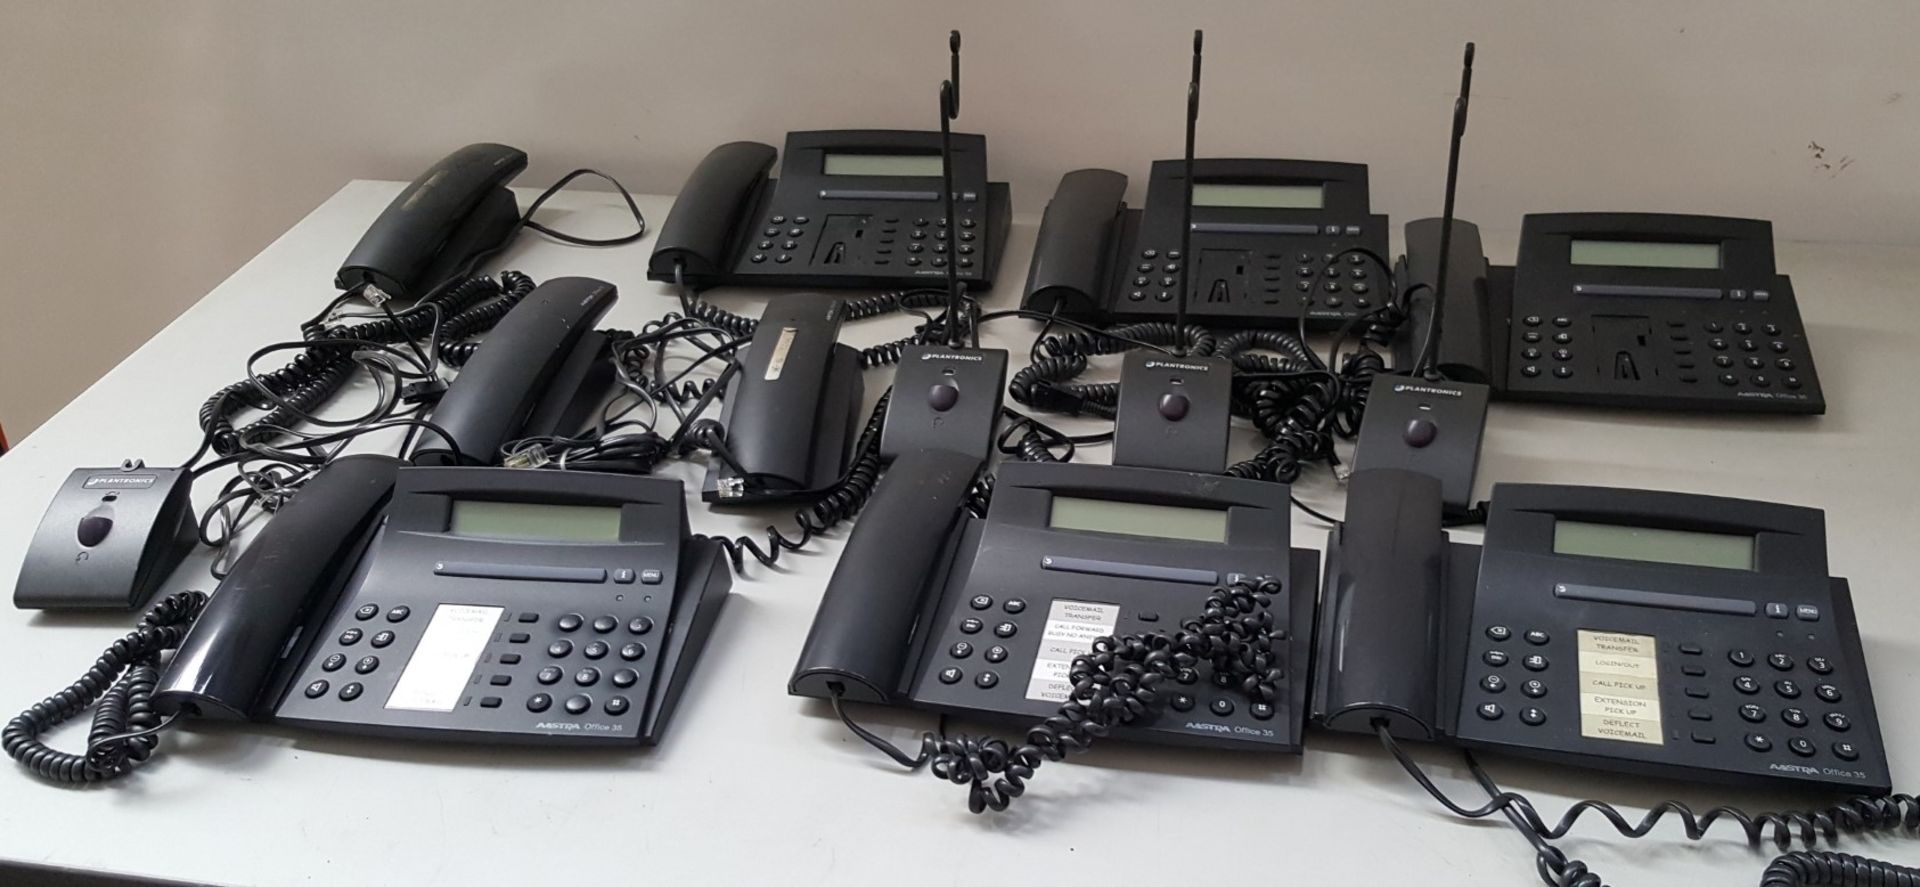 13 x Various Office Phones & Biway Switches - Brands Include Aastra and Plantronics -Ref LD382 LD1 - - Image 3 of 5